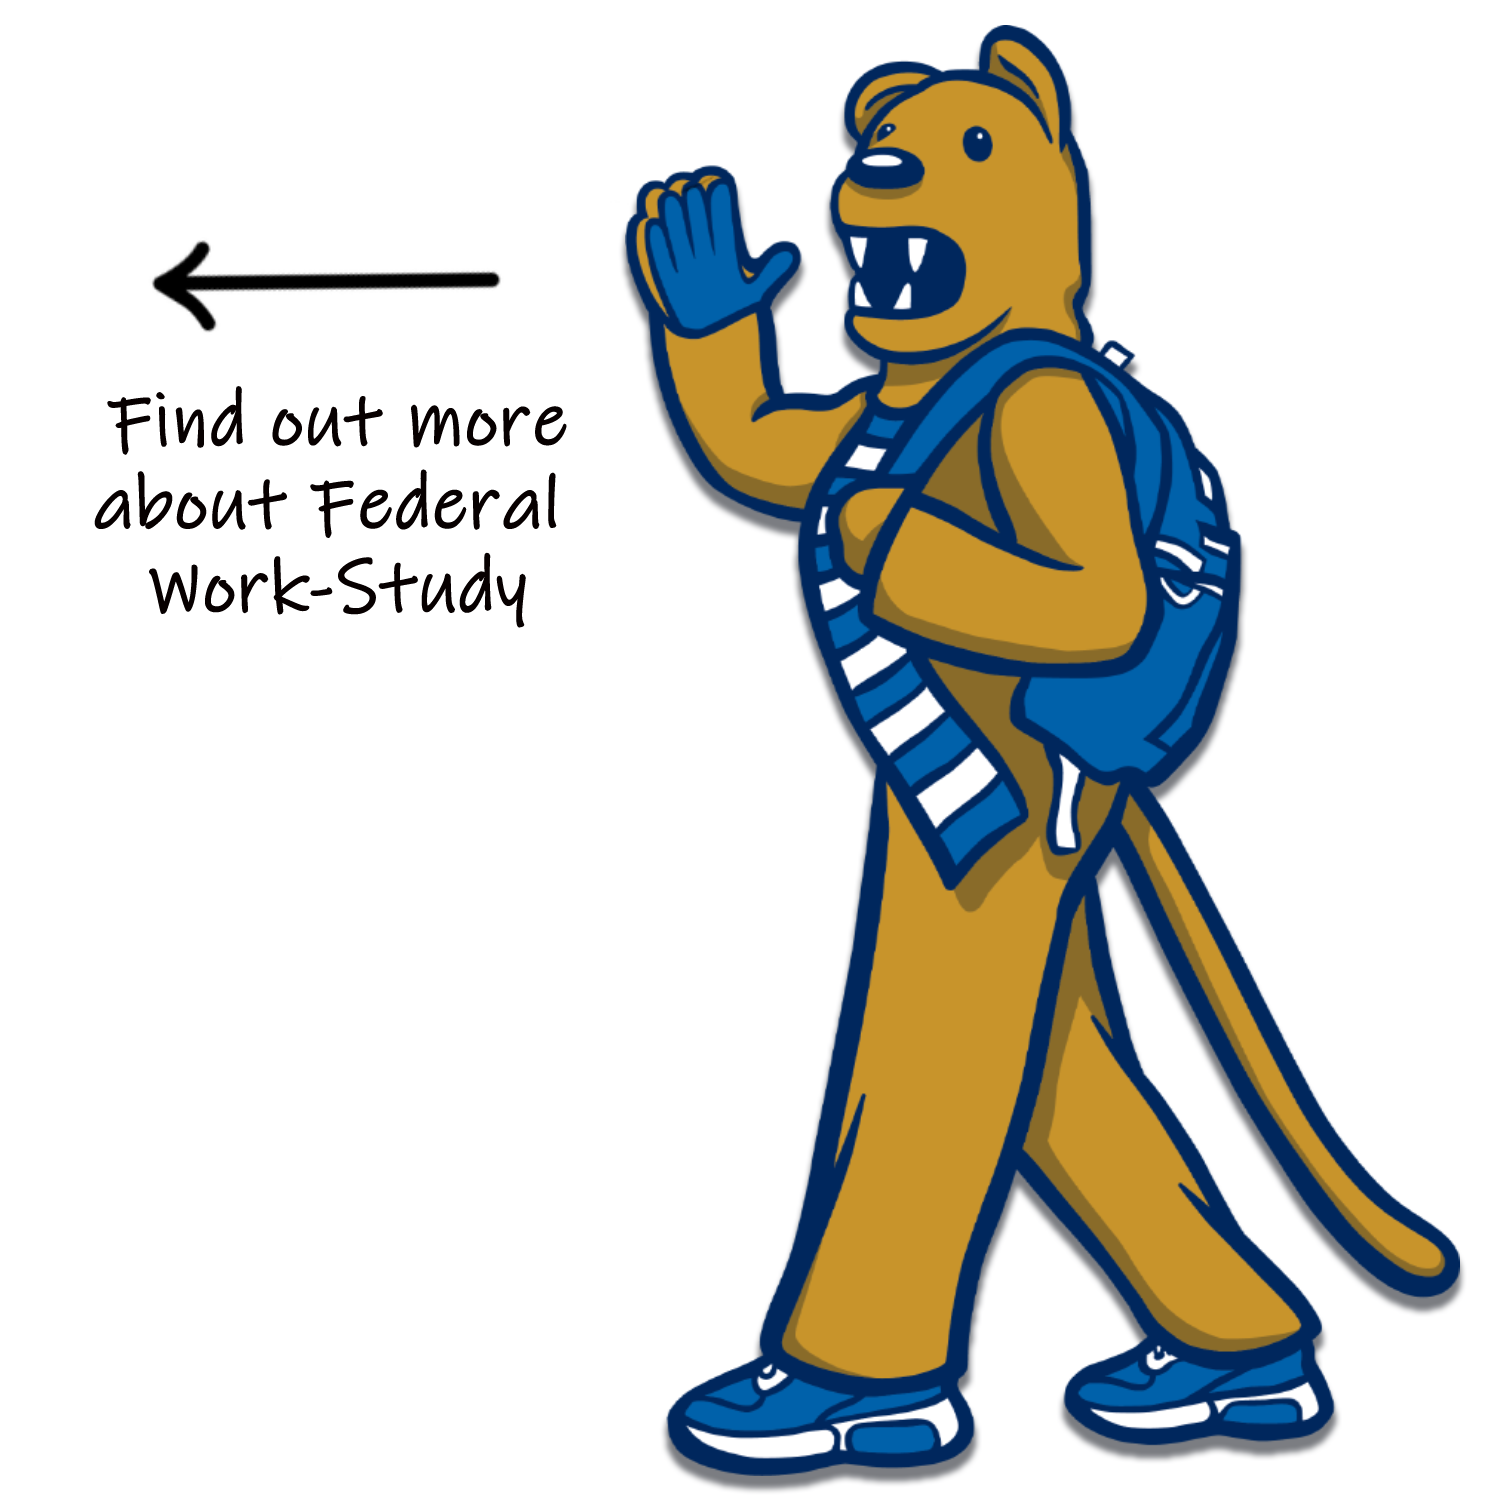 Cartoon Nittany Lion with Backpack. Image: Penn State